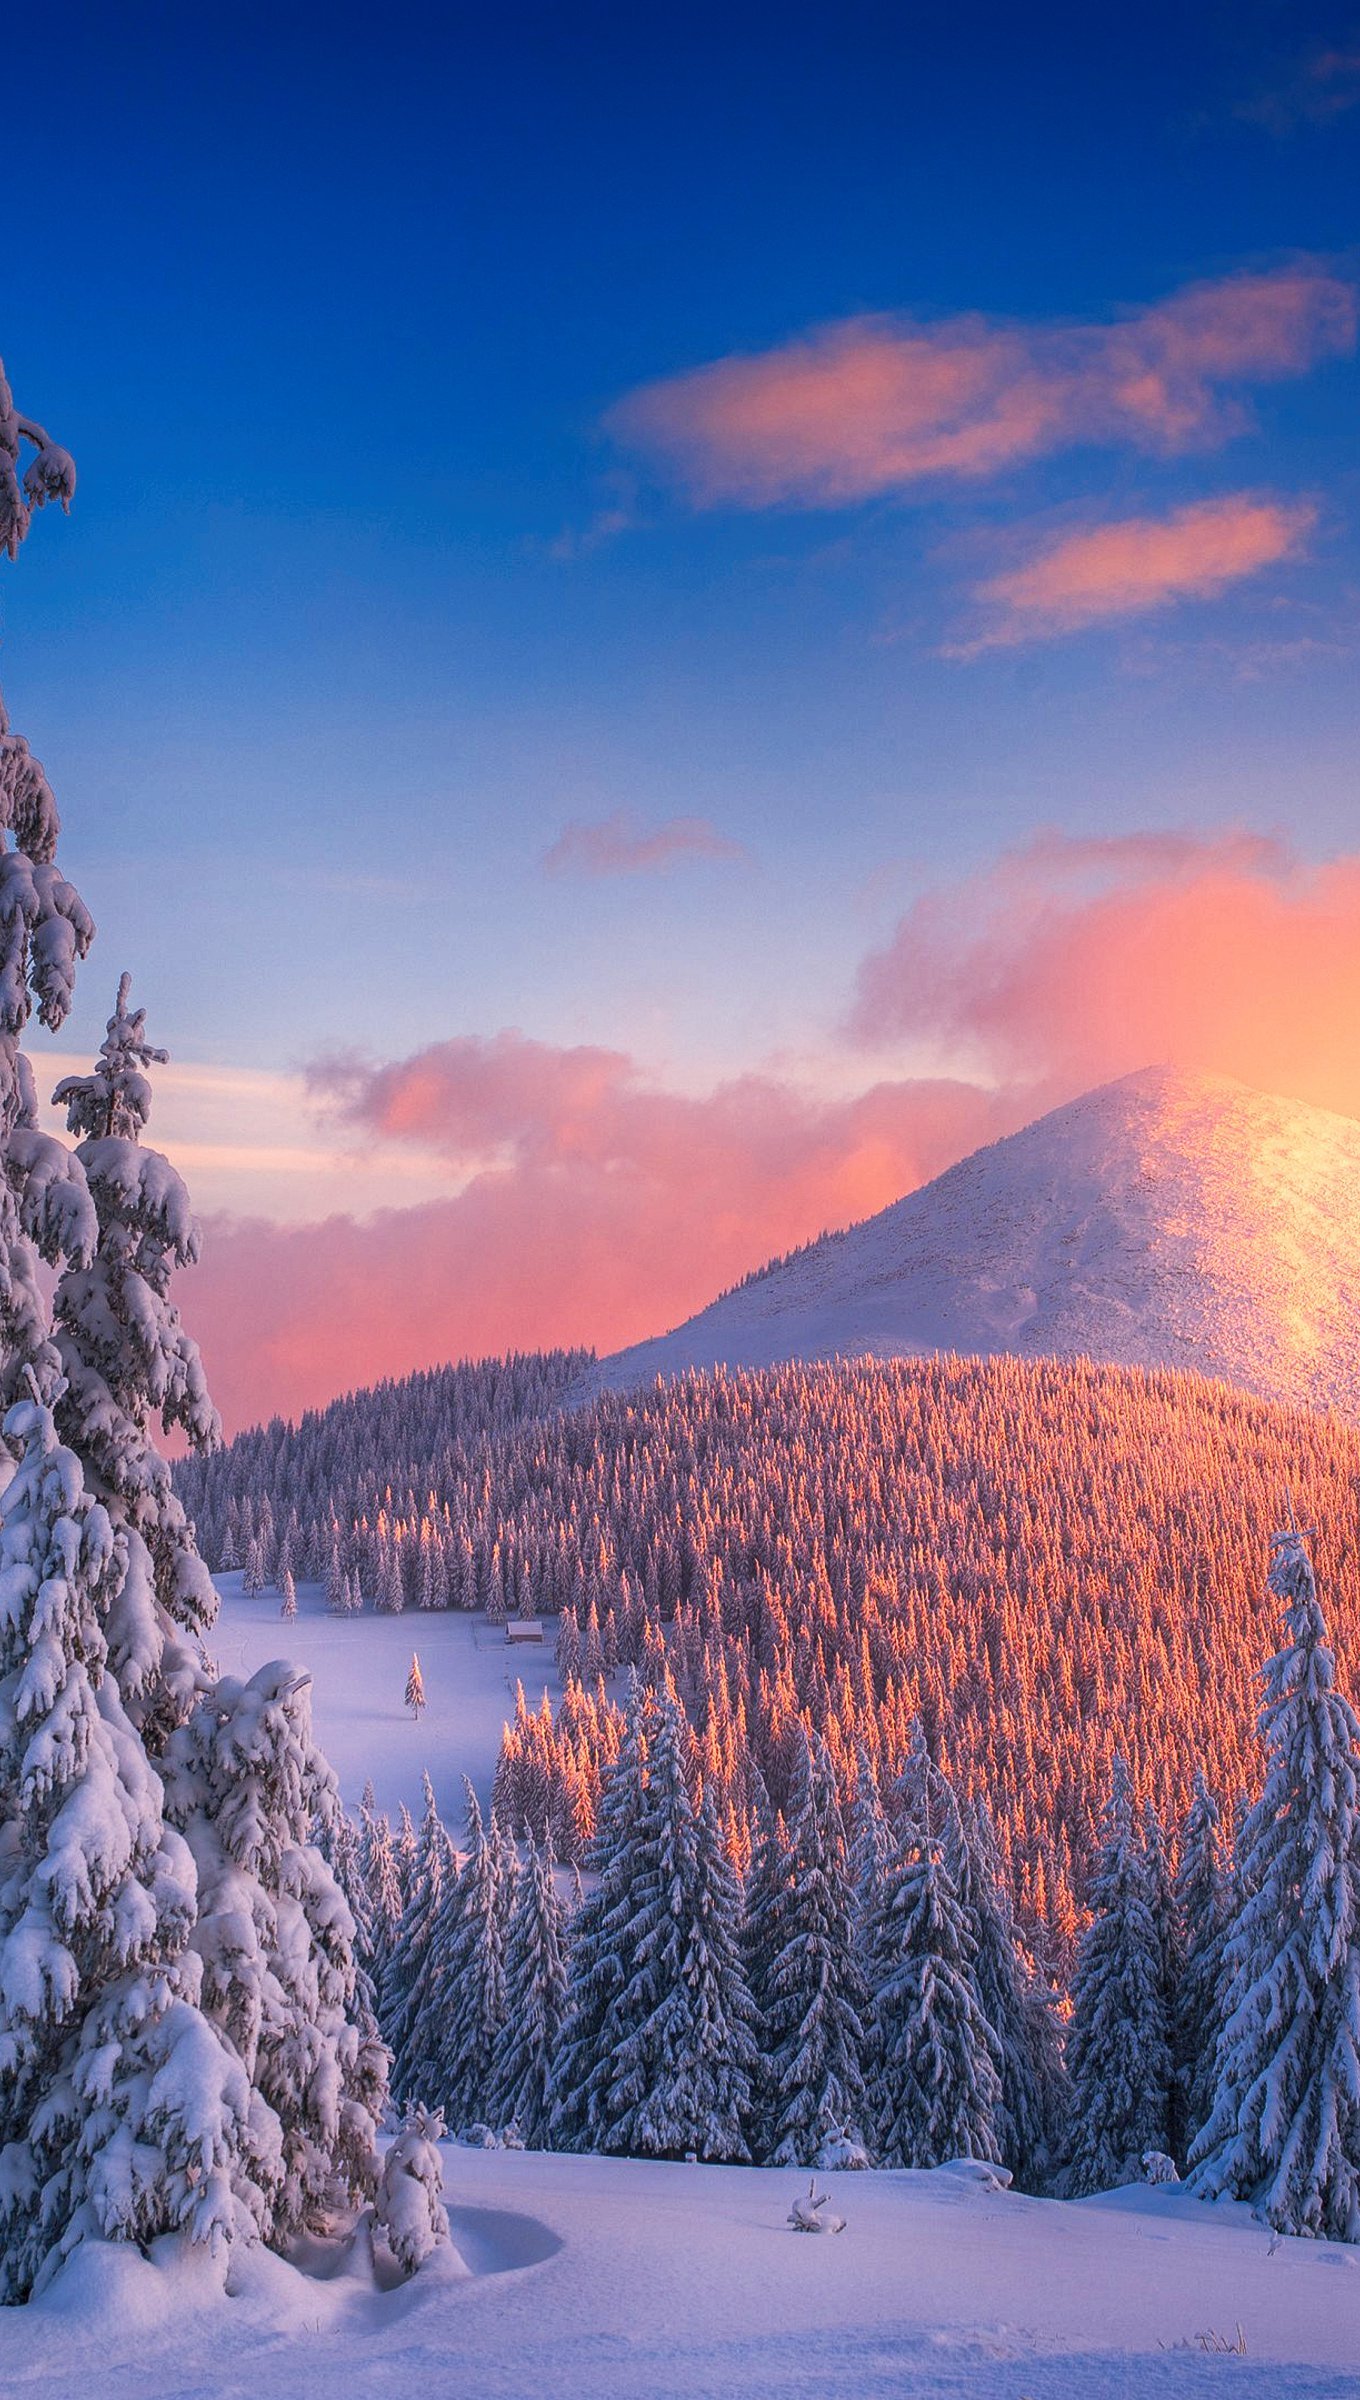 Snowy pine trees at sunset in mountains Wallpaper 4k Ultra HD ID:4397